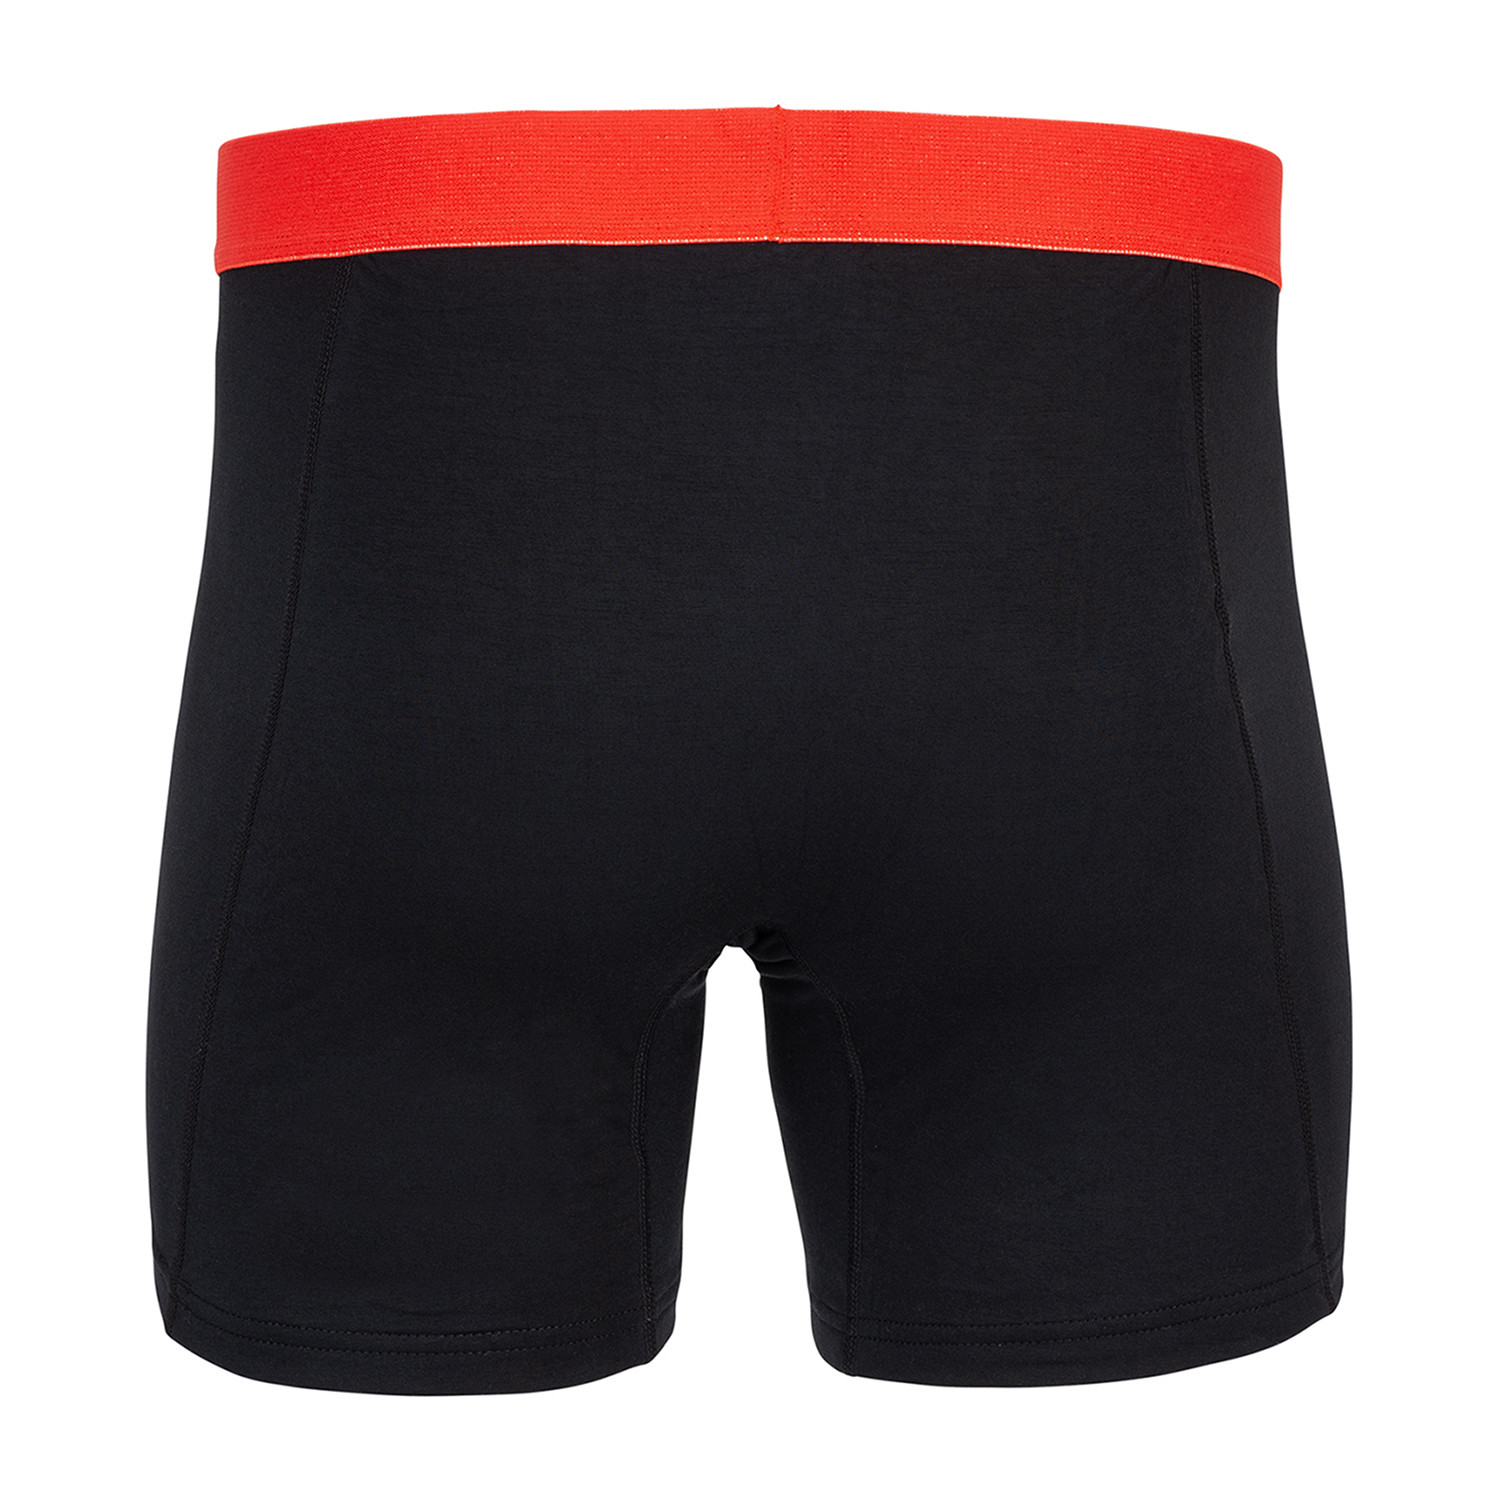 Sweat Proof Boxer Brief + Fly // Black + Blue (S) - Ejis - Touch of Modern